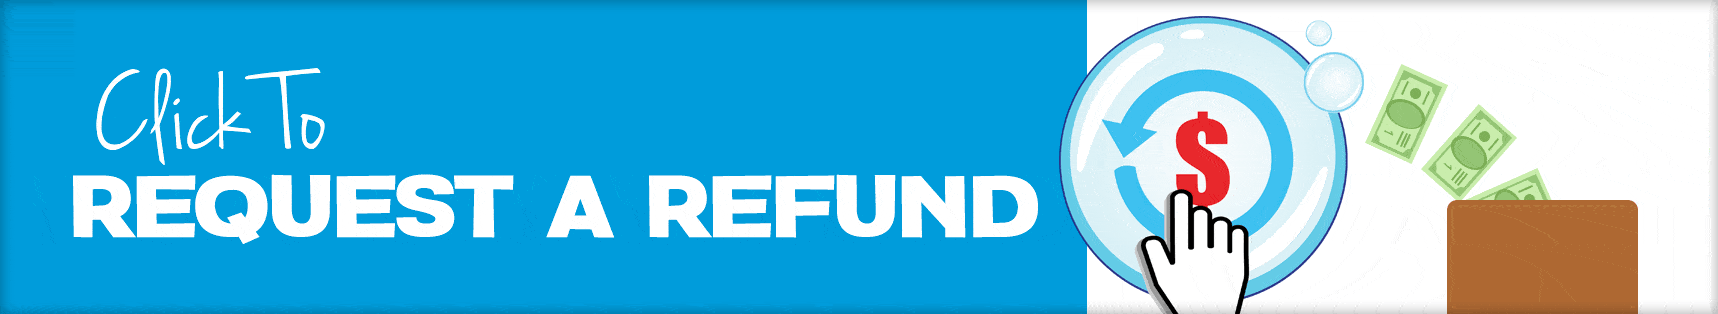 How To Request a Refund at a Self Service SuperSuds